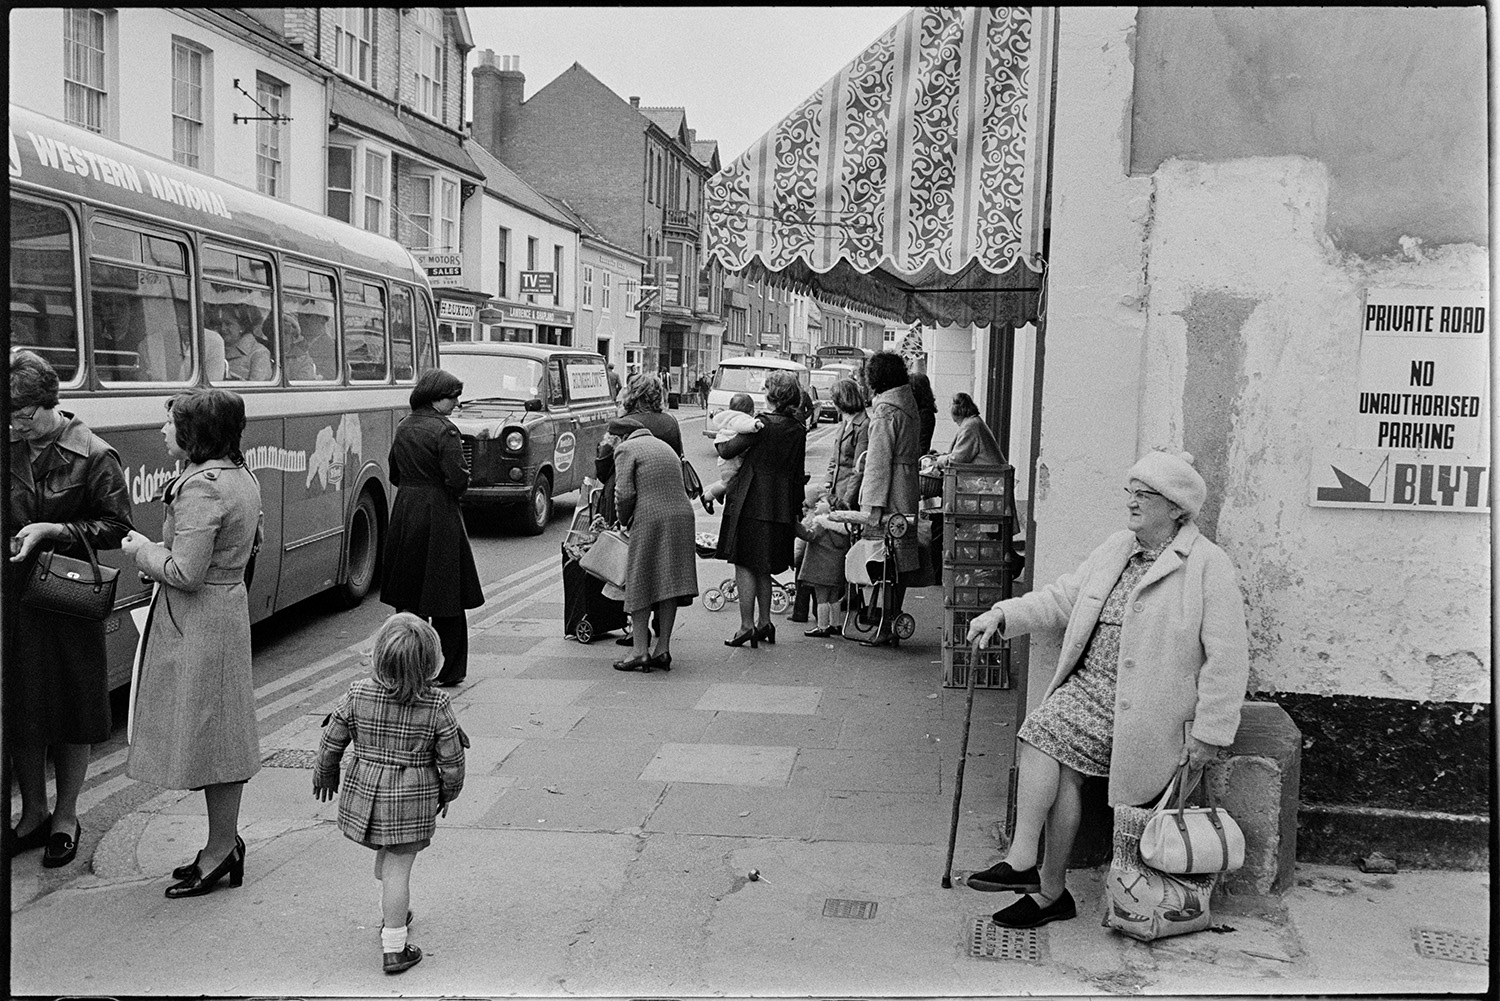 Street scene woman resting and passing bus. 
[A woman resting on a bollard by a shop front in Barnstaple High Street. Her shopping bags are by her side. Women and children are waiting in the street for a bus which has just arrived. Shop fronts are visible along the street, including one in the foreground with an awning and crates outside.]